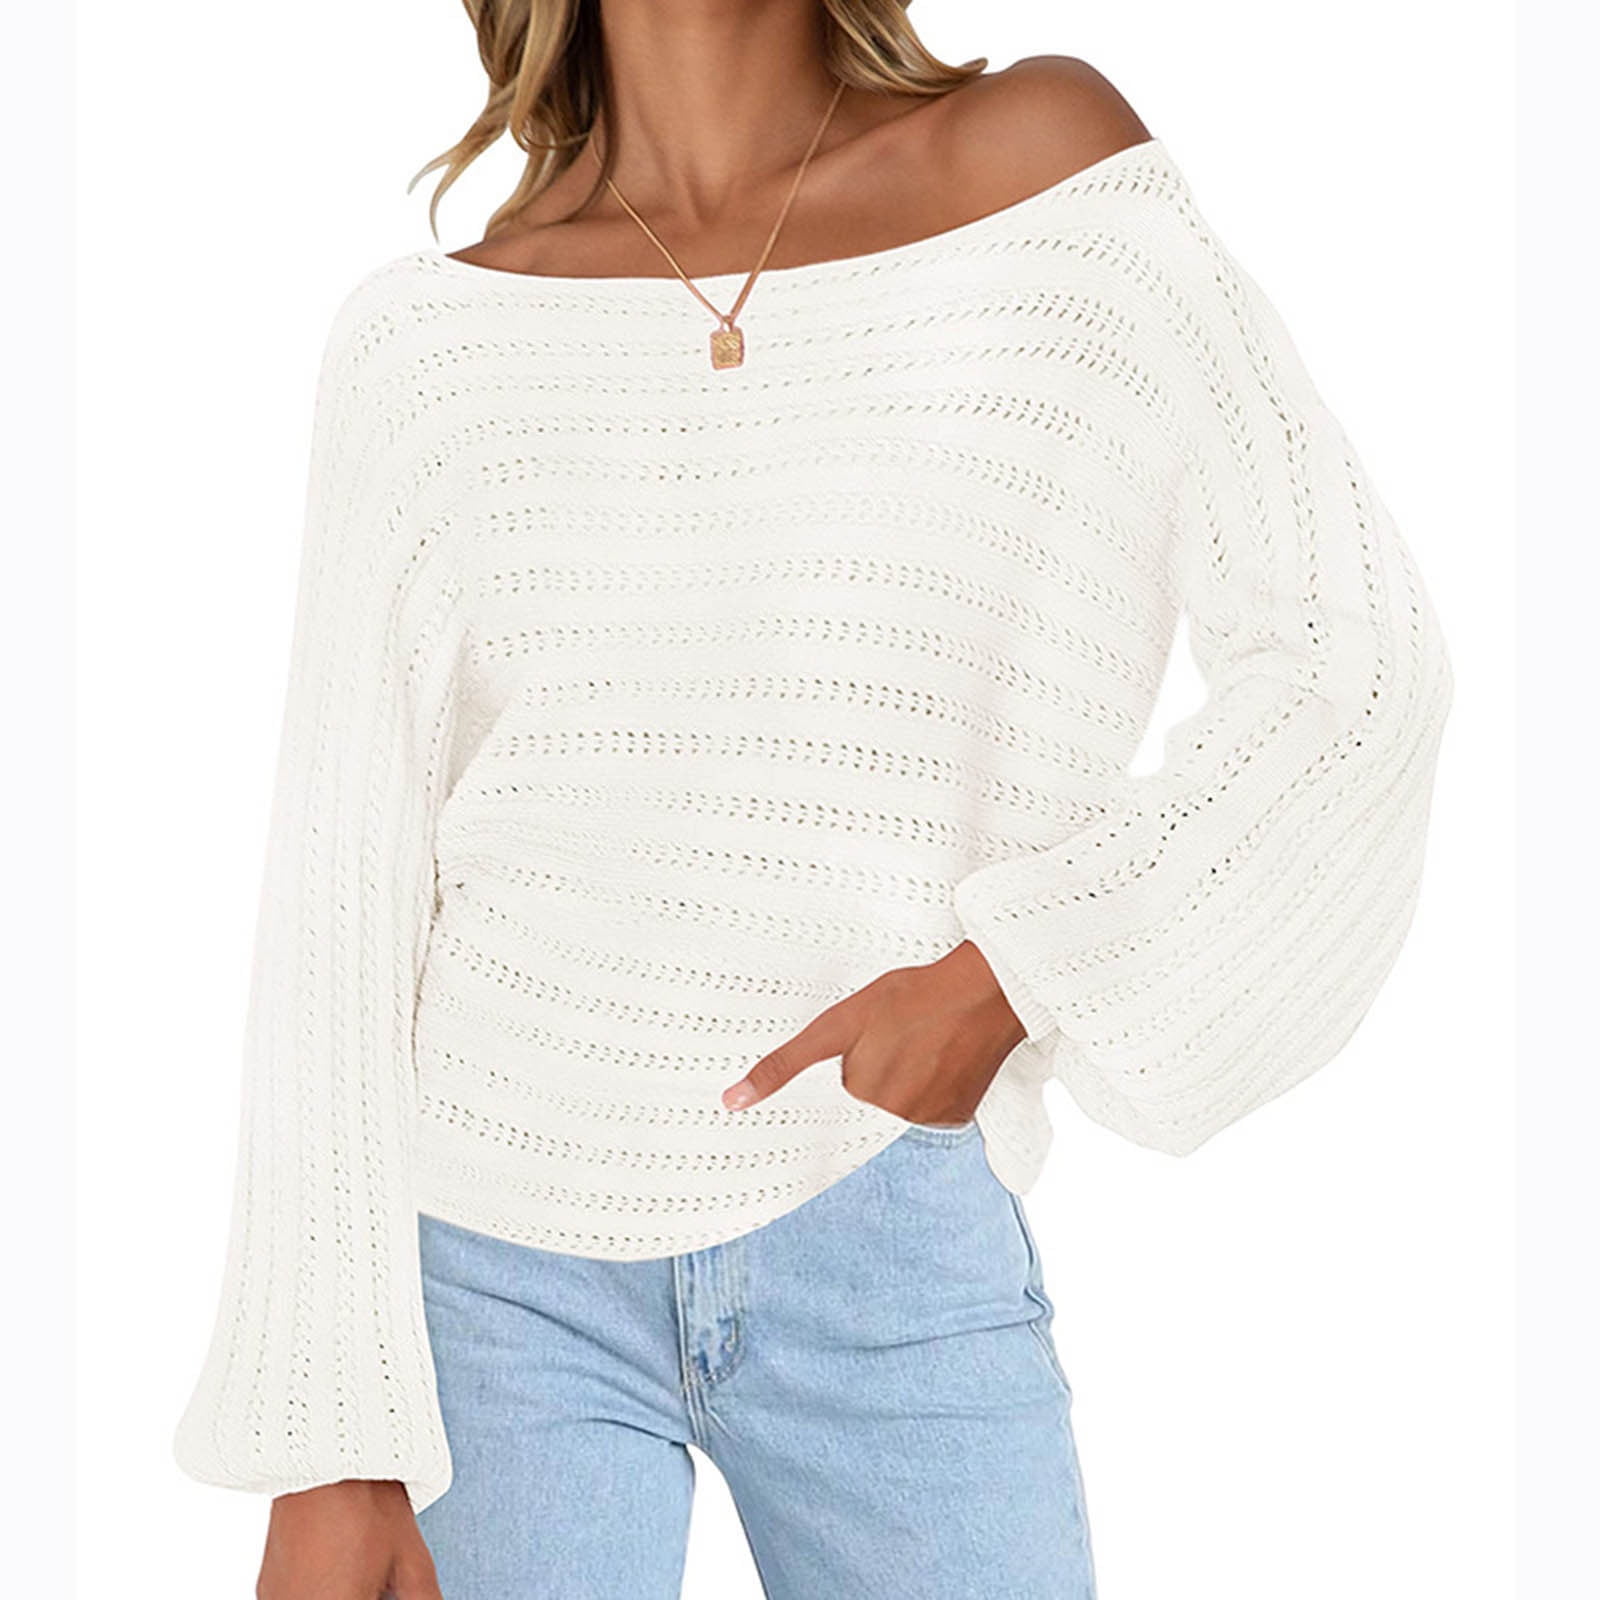 REORIAFEE Women's Off Shoulder Sweater Cable Knit Casual Loose Pullover Y2k Sweaters Long Sleeve Round Neck White S - Walmart.com